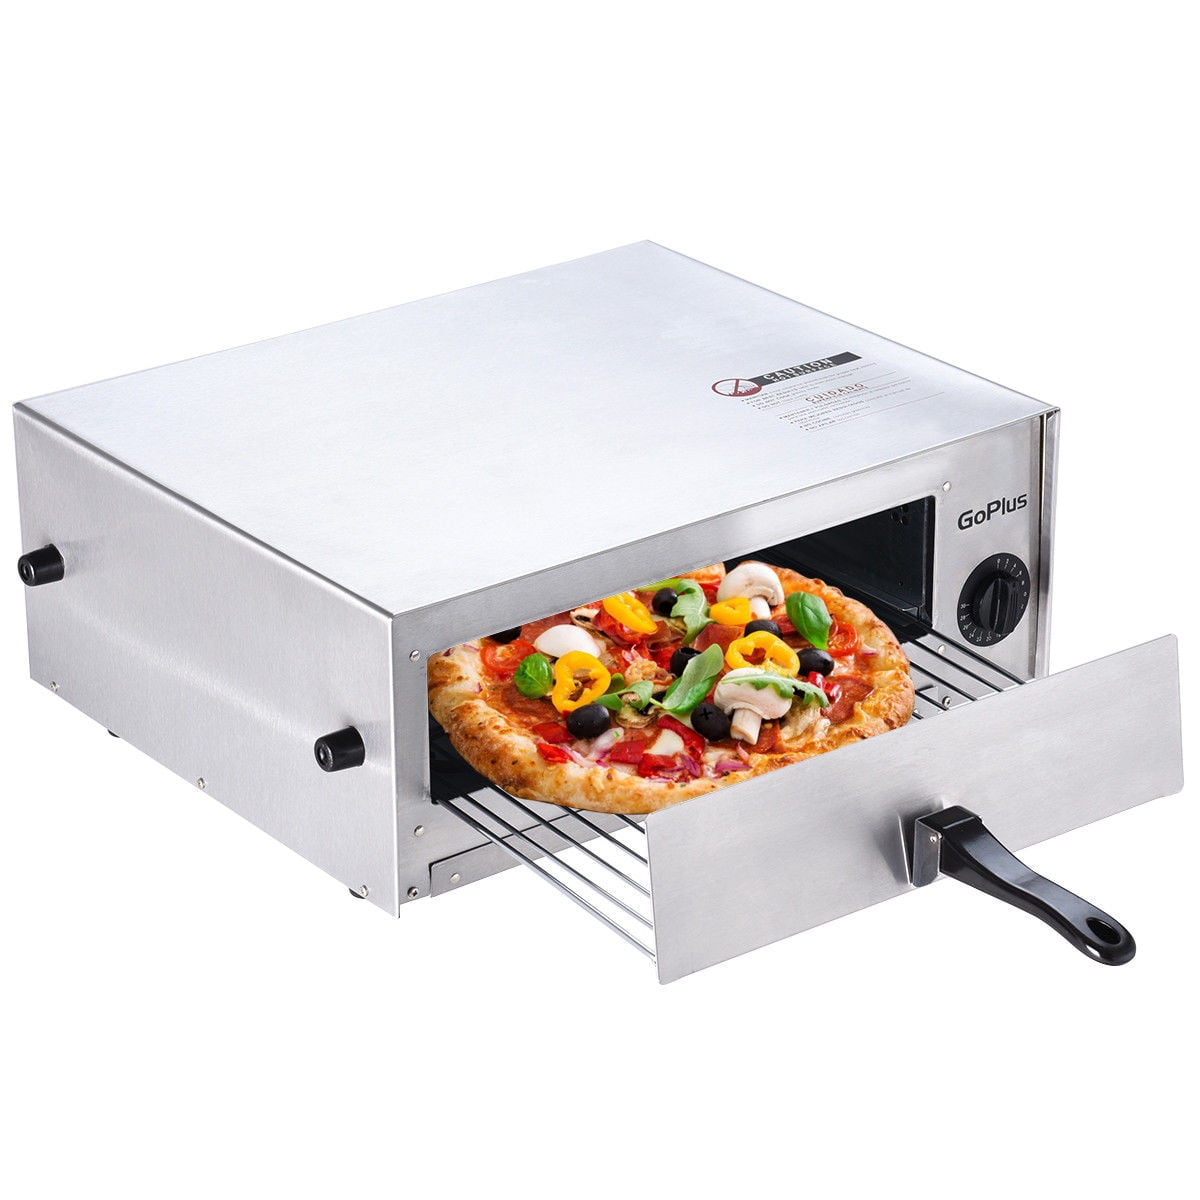 Goplus Pizza Convection Oven Snack Pan Stainless Steel